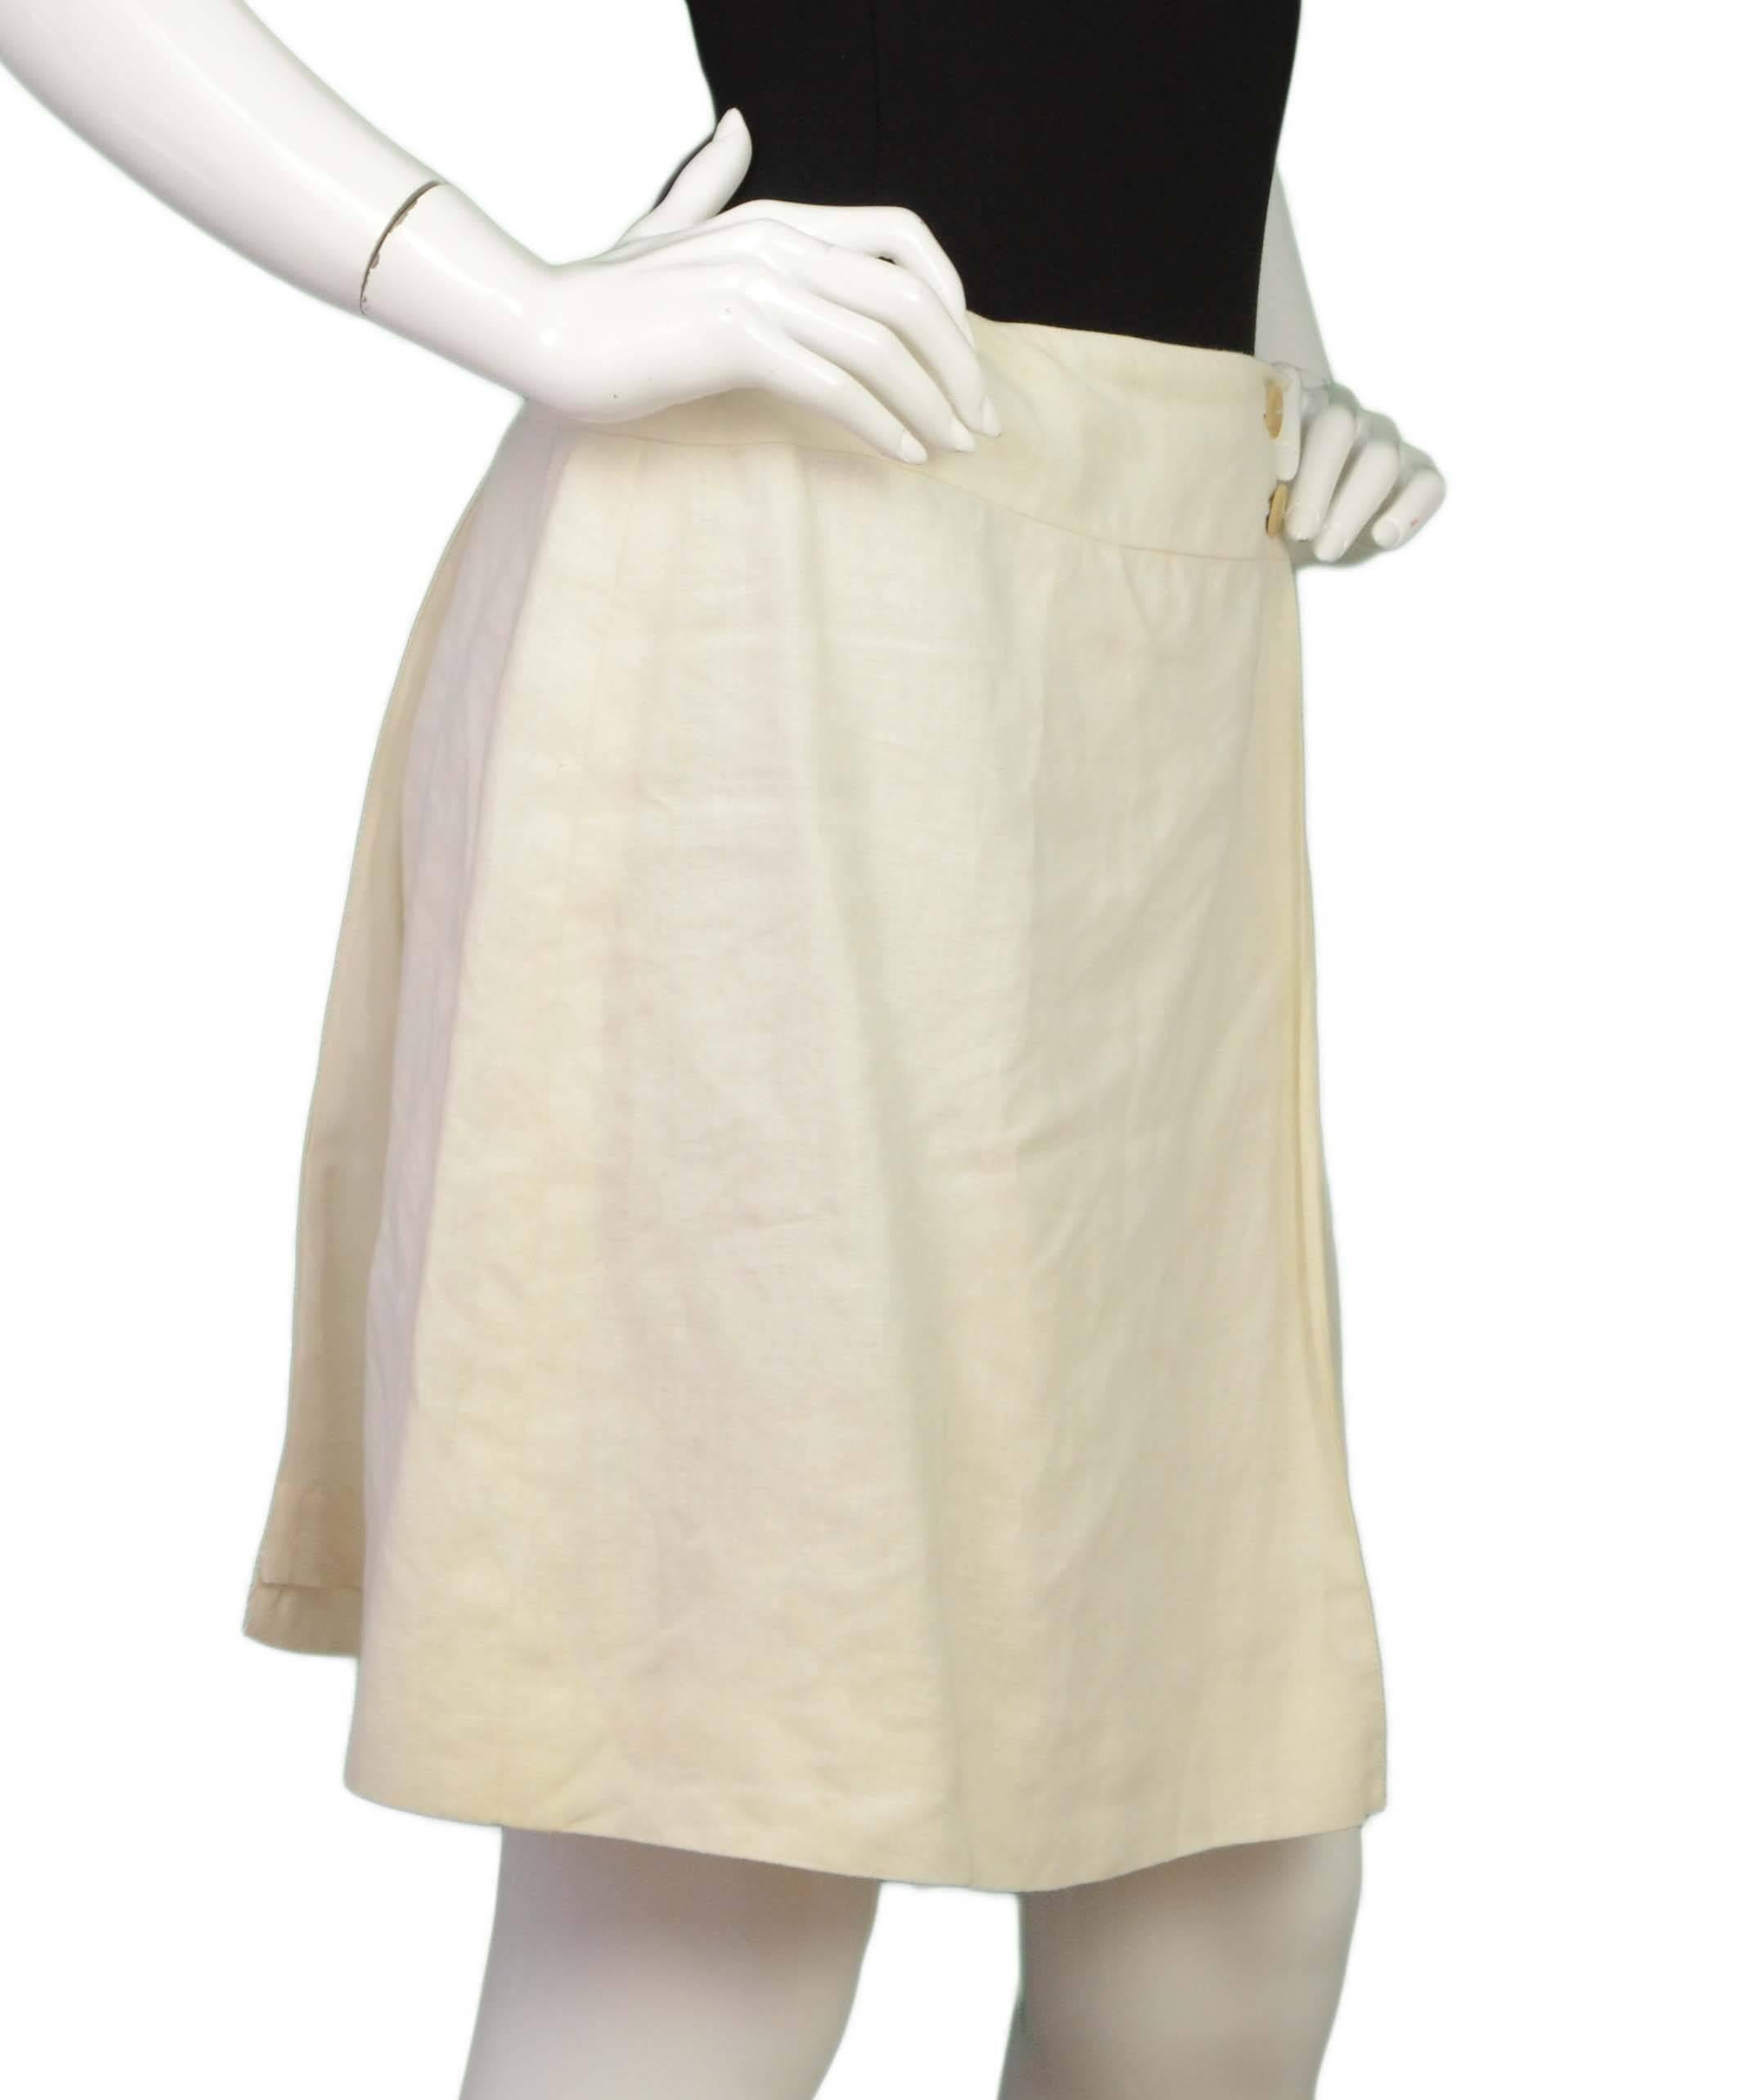 Chanel Ivory Linen Wrap Skirt
Features wooden “Chanel Paris” buttons
Made In: France
Year of Production: 2000
Color: Ivory
Composition: 100% linen
Lining: Ivory, 100% silk
Closure/Opening: Wrap around with double button closure on either side